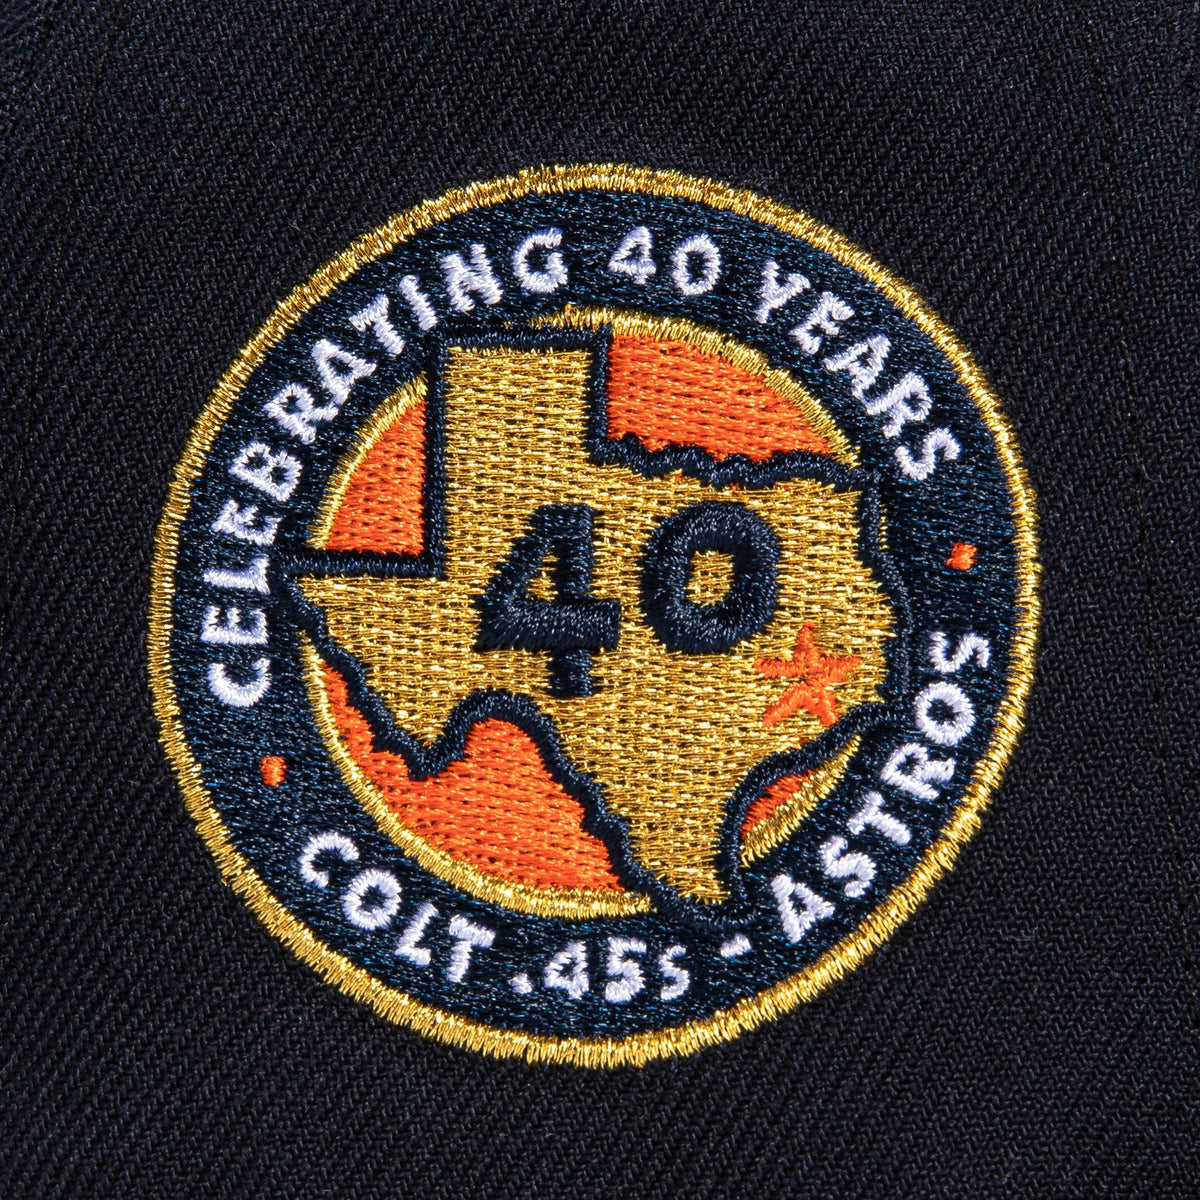 Hat Club Colt 45 Beer Pack Houston Astros 40th Anniversary Patch